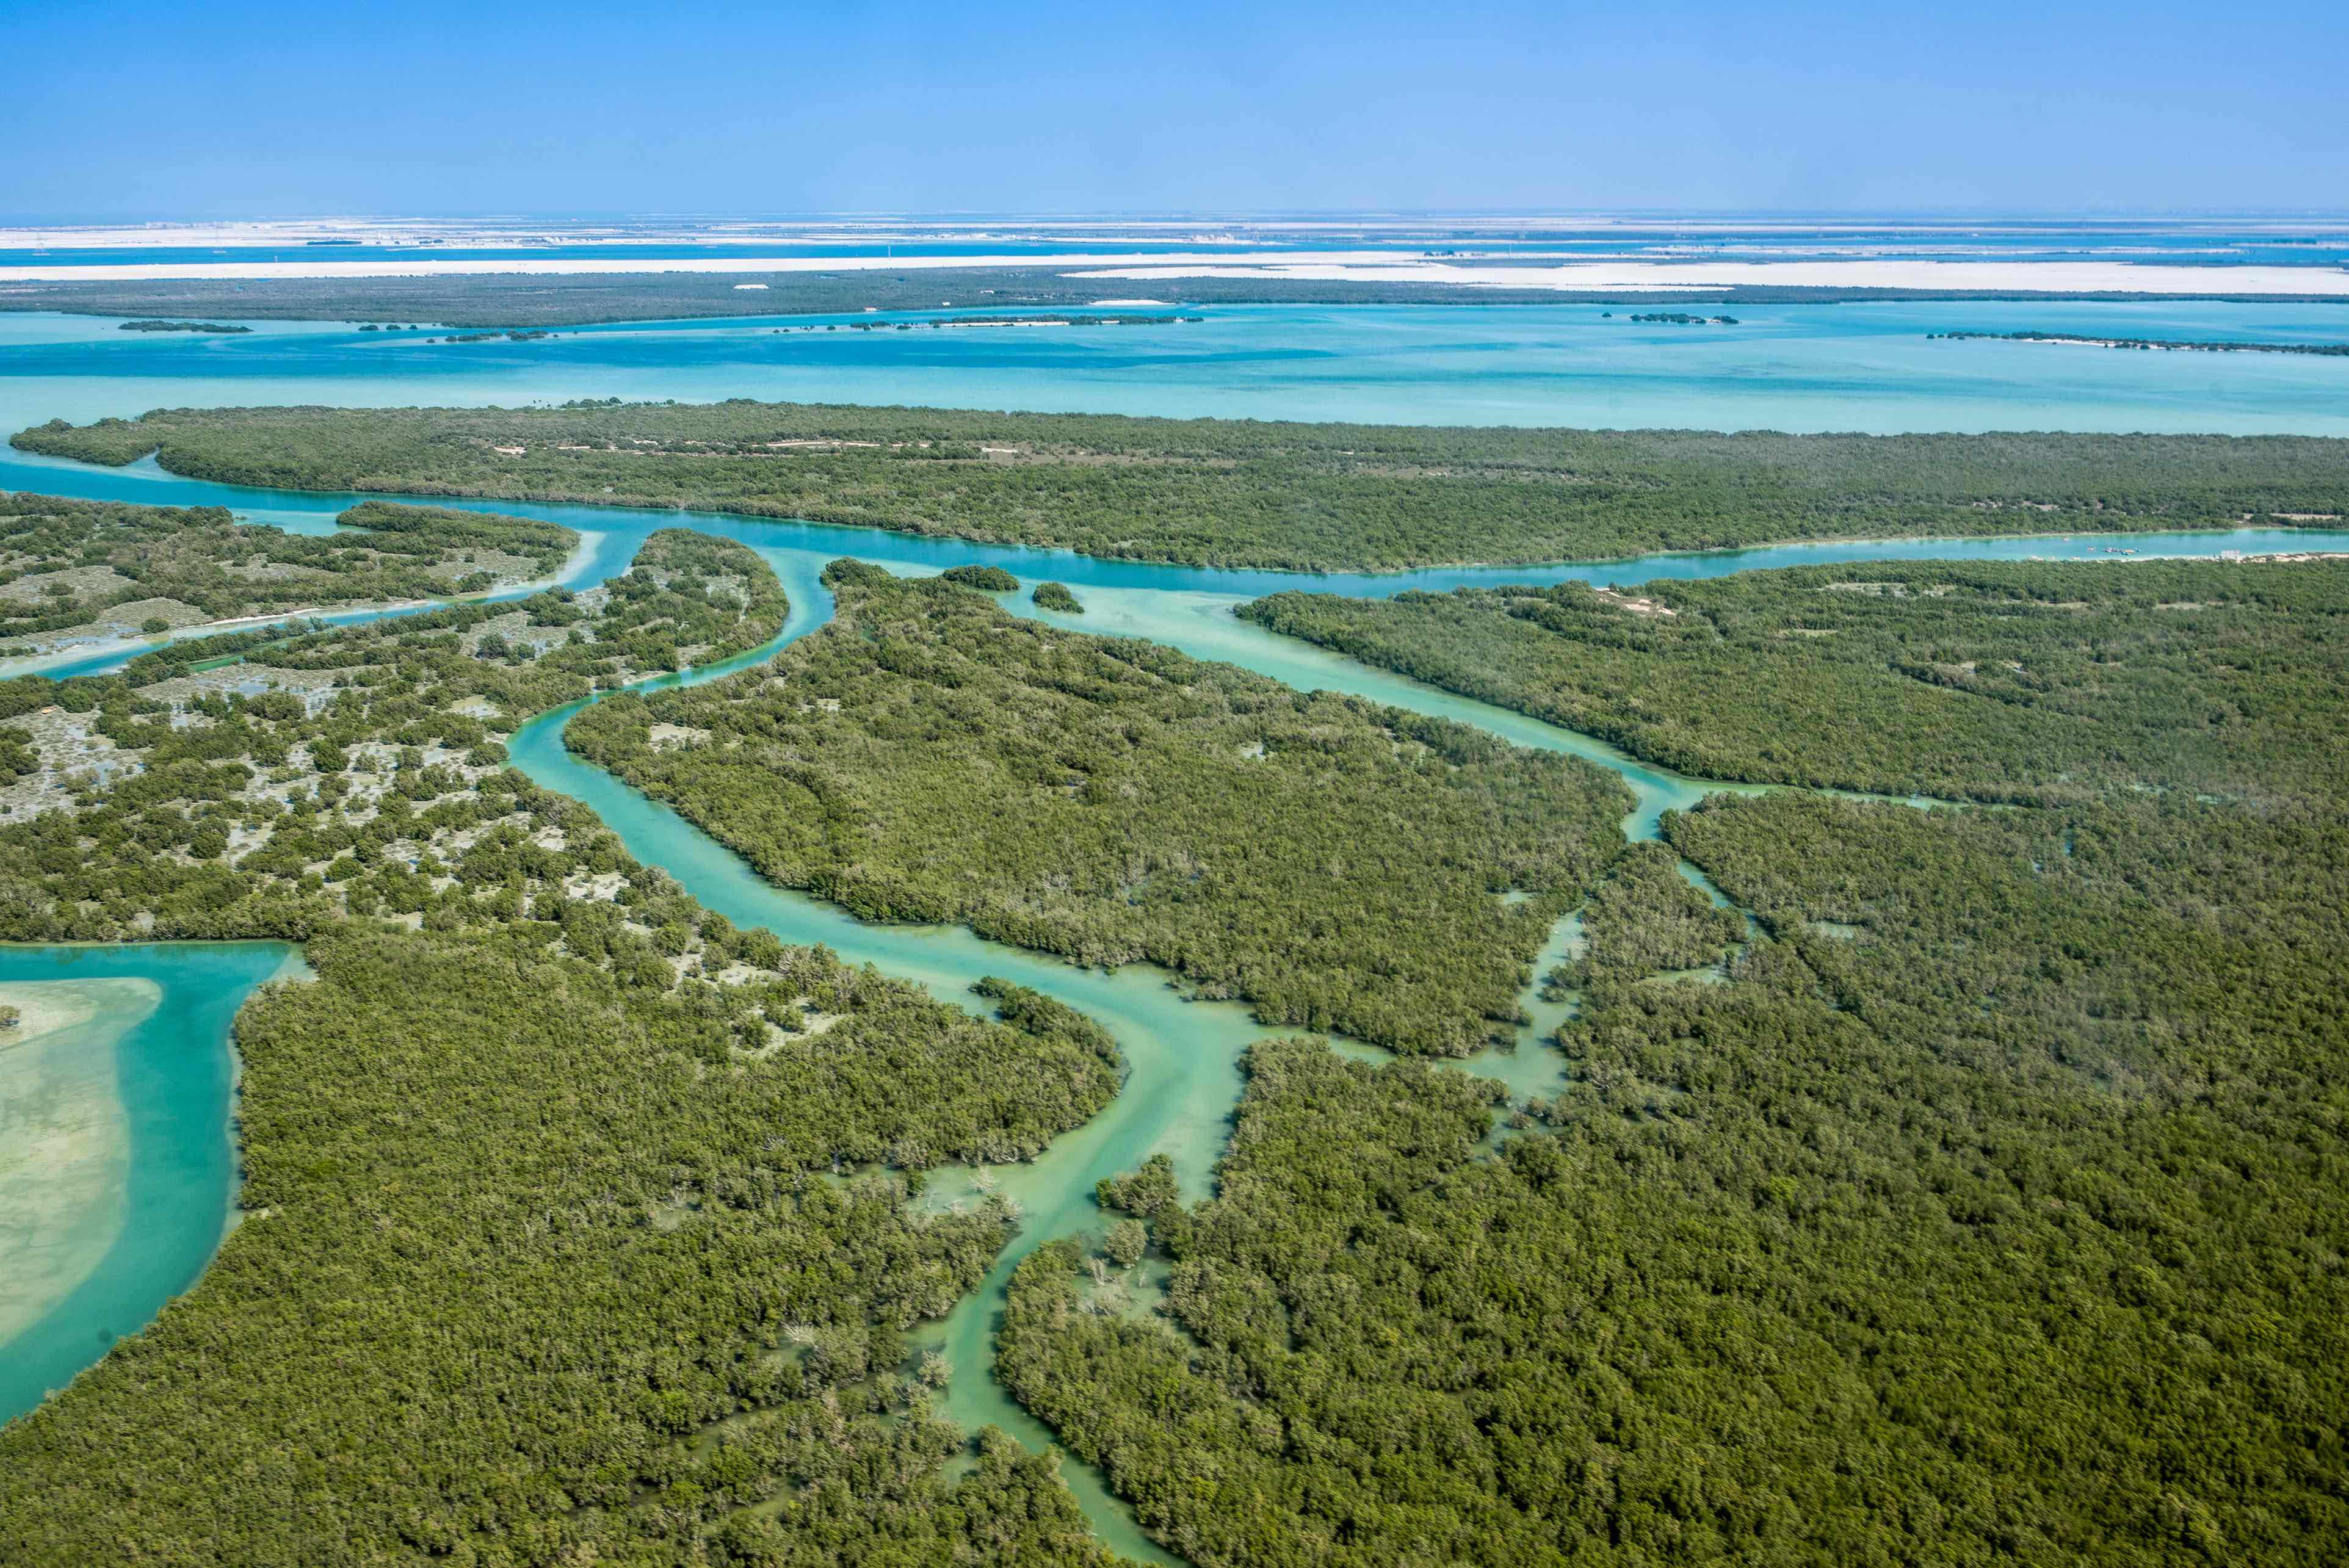 The Benefits of Mangrove Restoration From Blue Carbon to Biodiversity